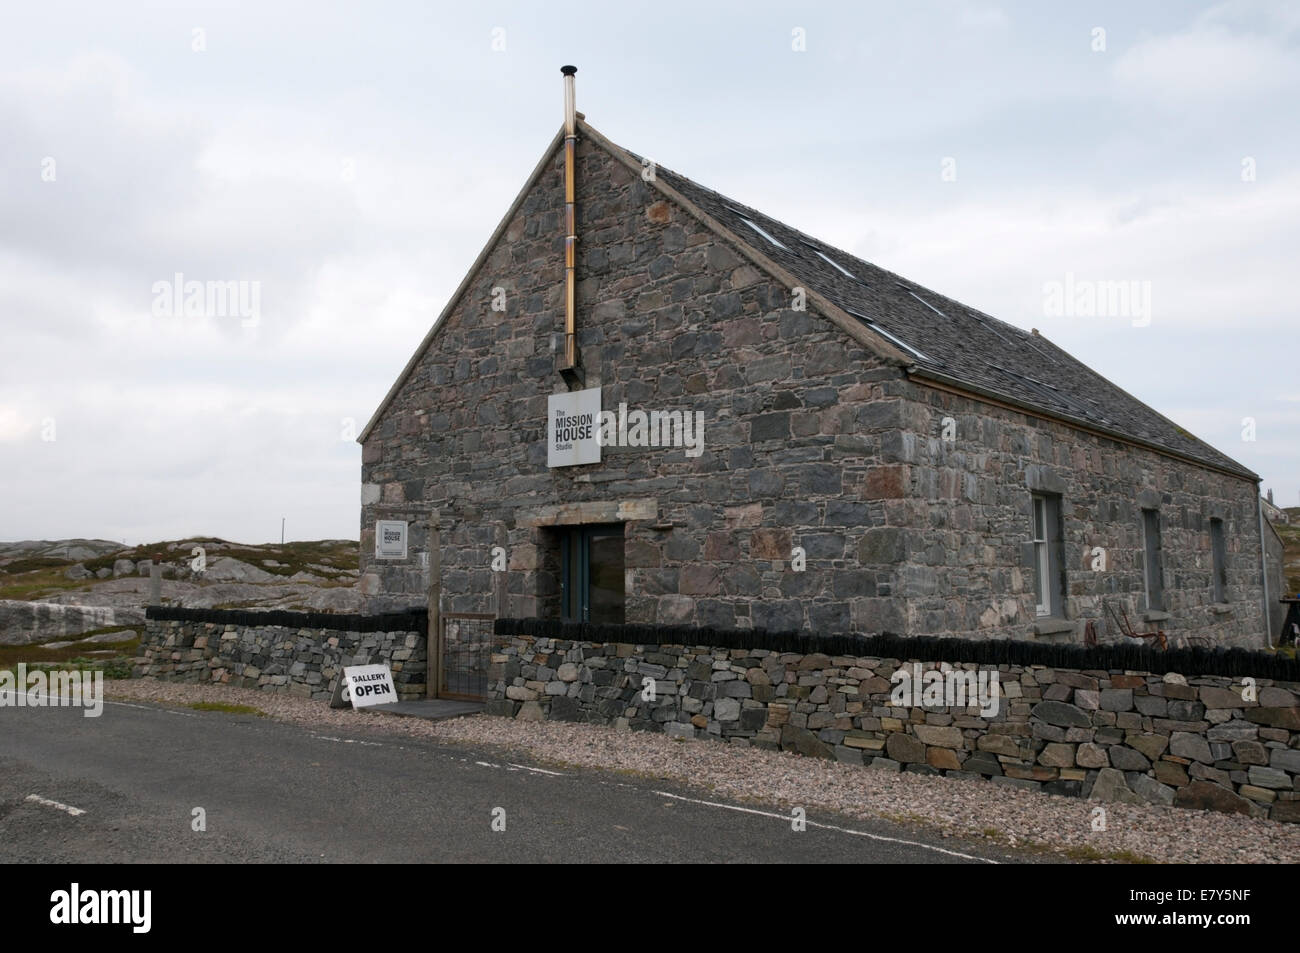 The Mission House Studio in South Harris is in a converted church and features the work of Beka and Nickolai Globe. Stock Photo